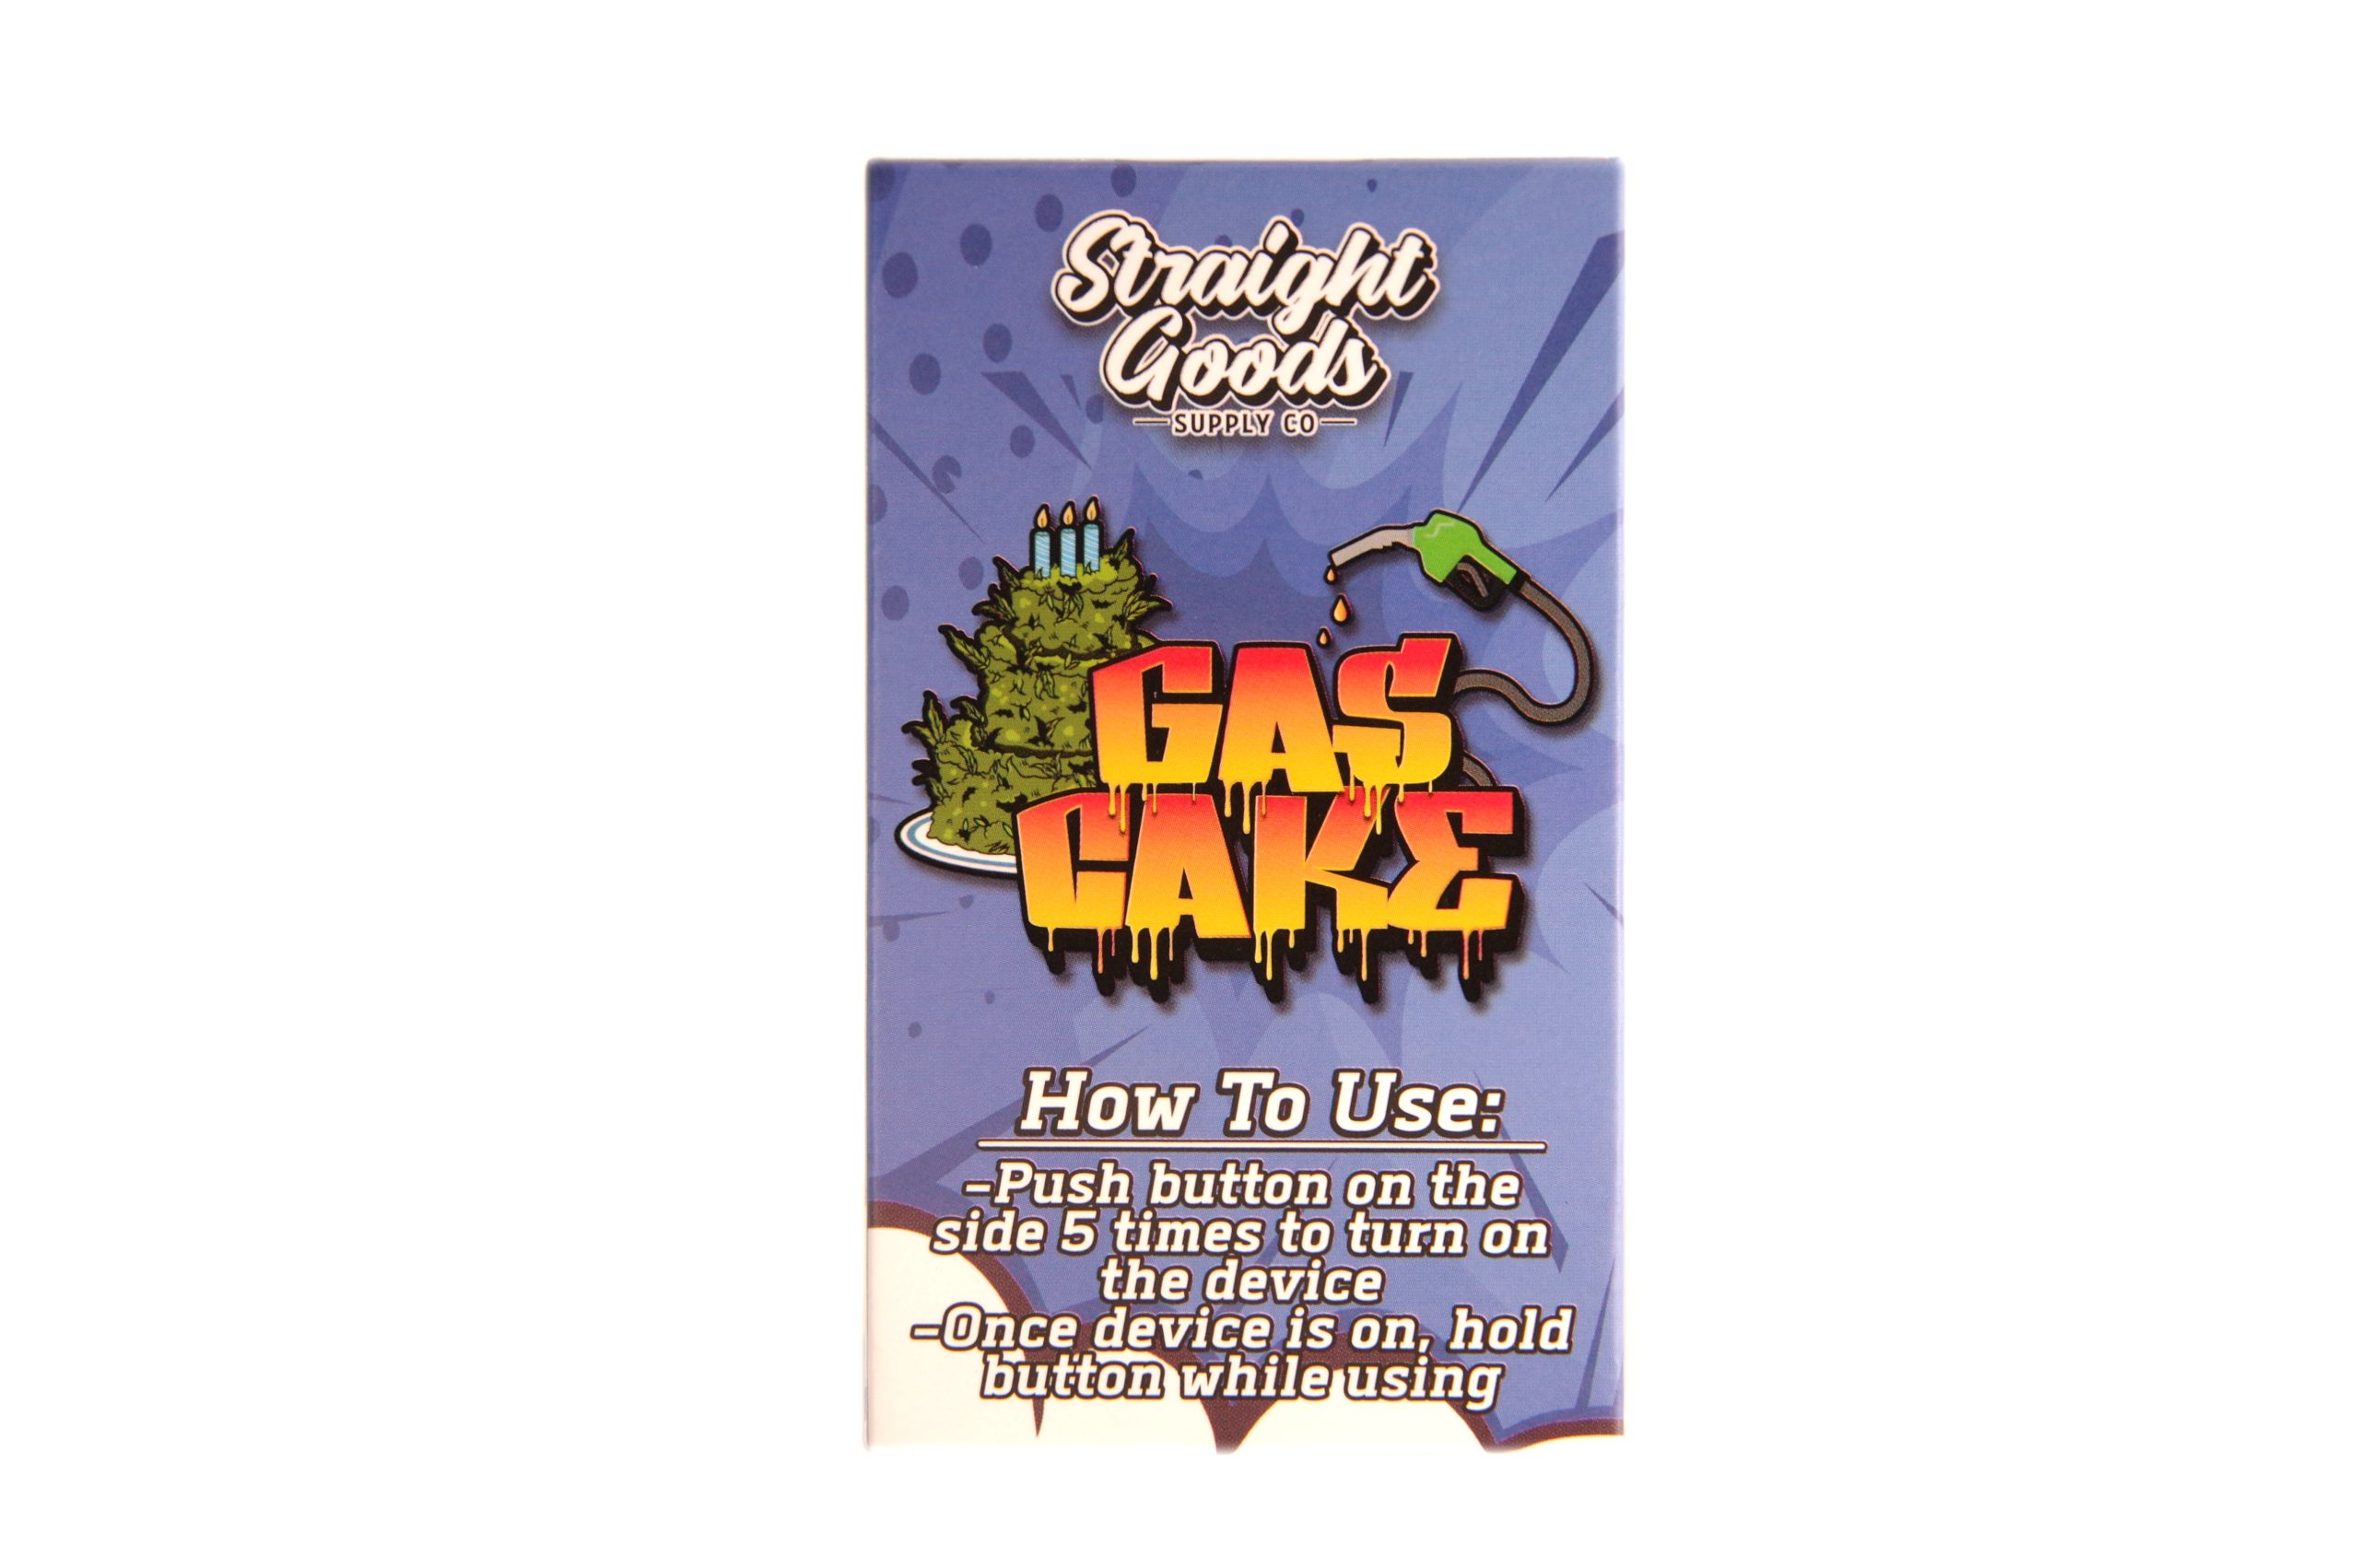 Buy Straight Goods – Gas Cake 3G Disposable Pen online Canada